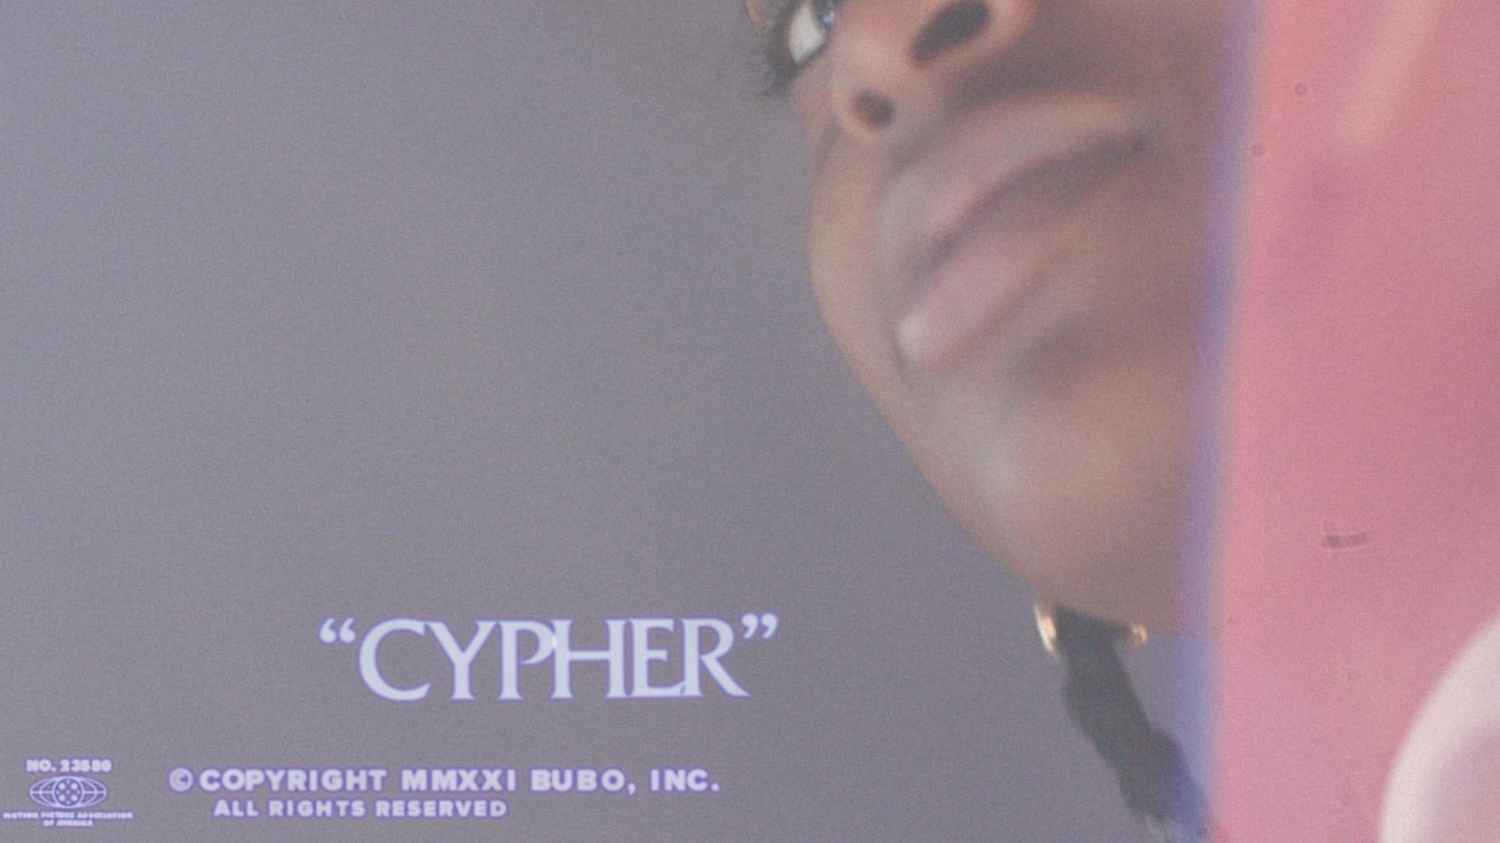 MUST WATCH Cypher with Kenya's Talented MCs - The Sauce